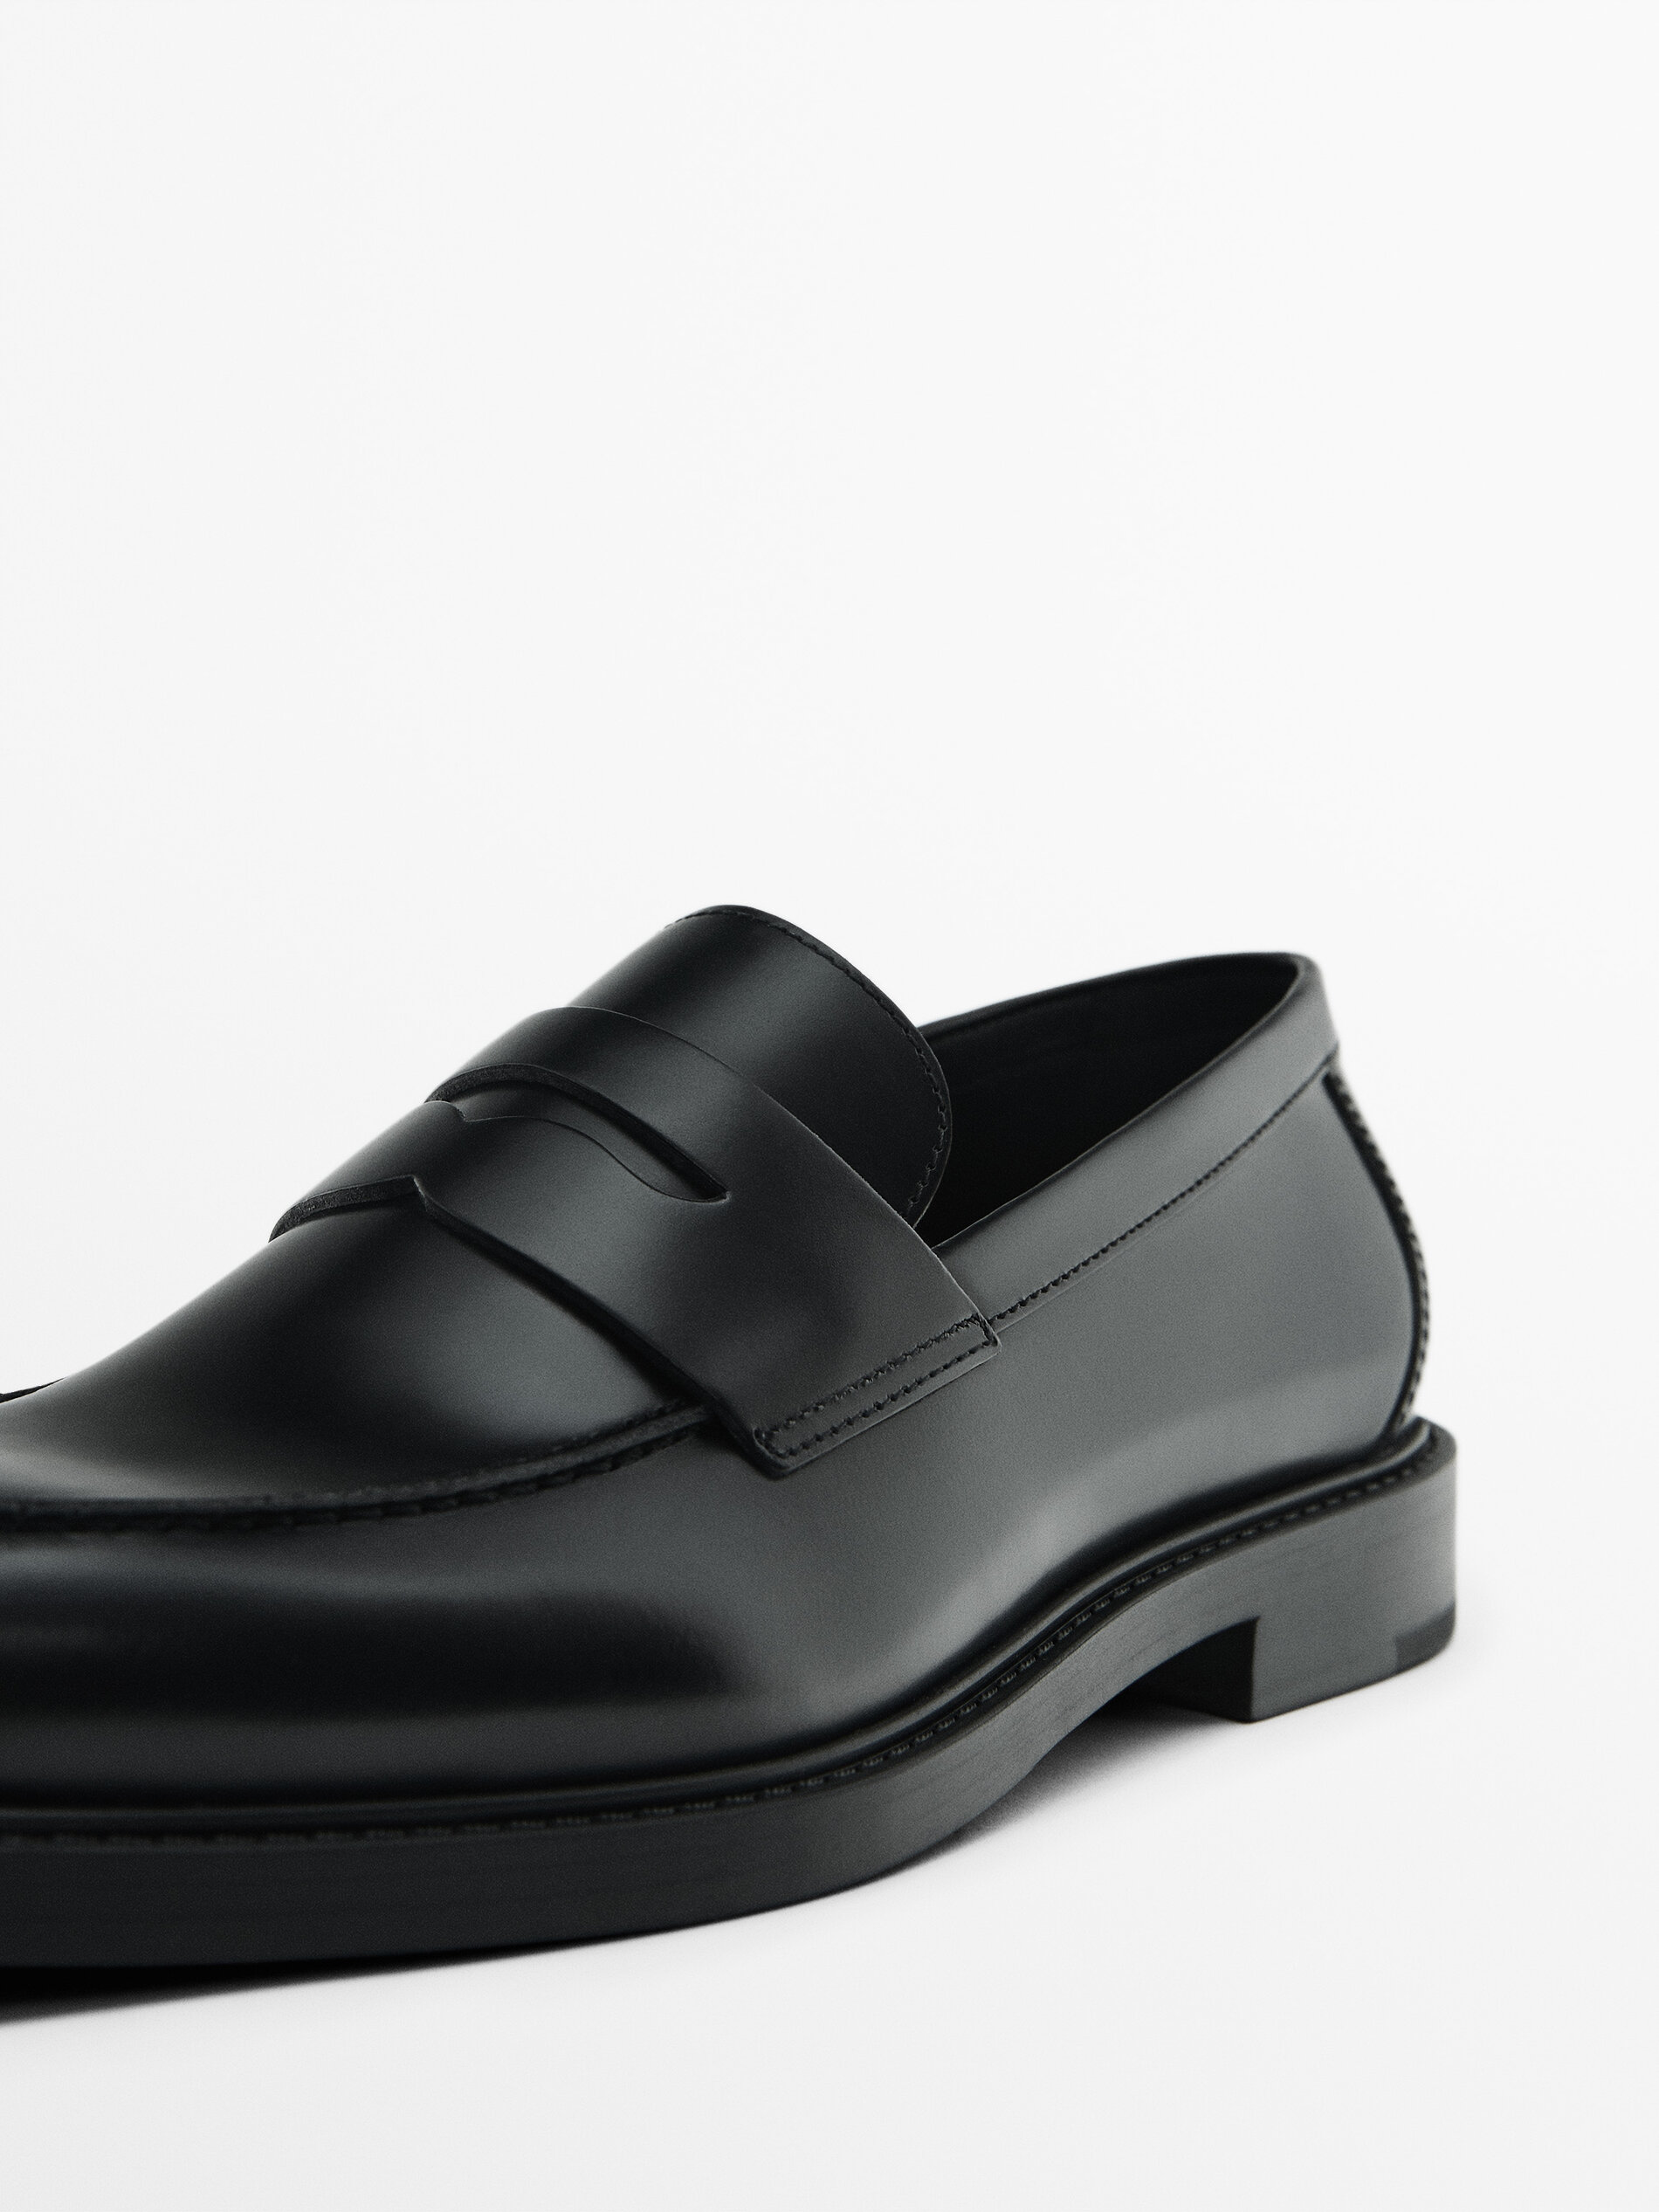 Black leather penny loafers